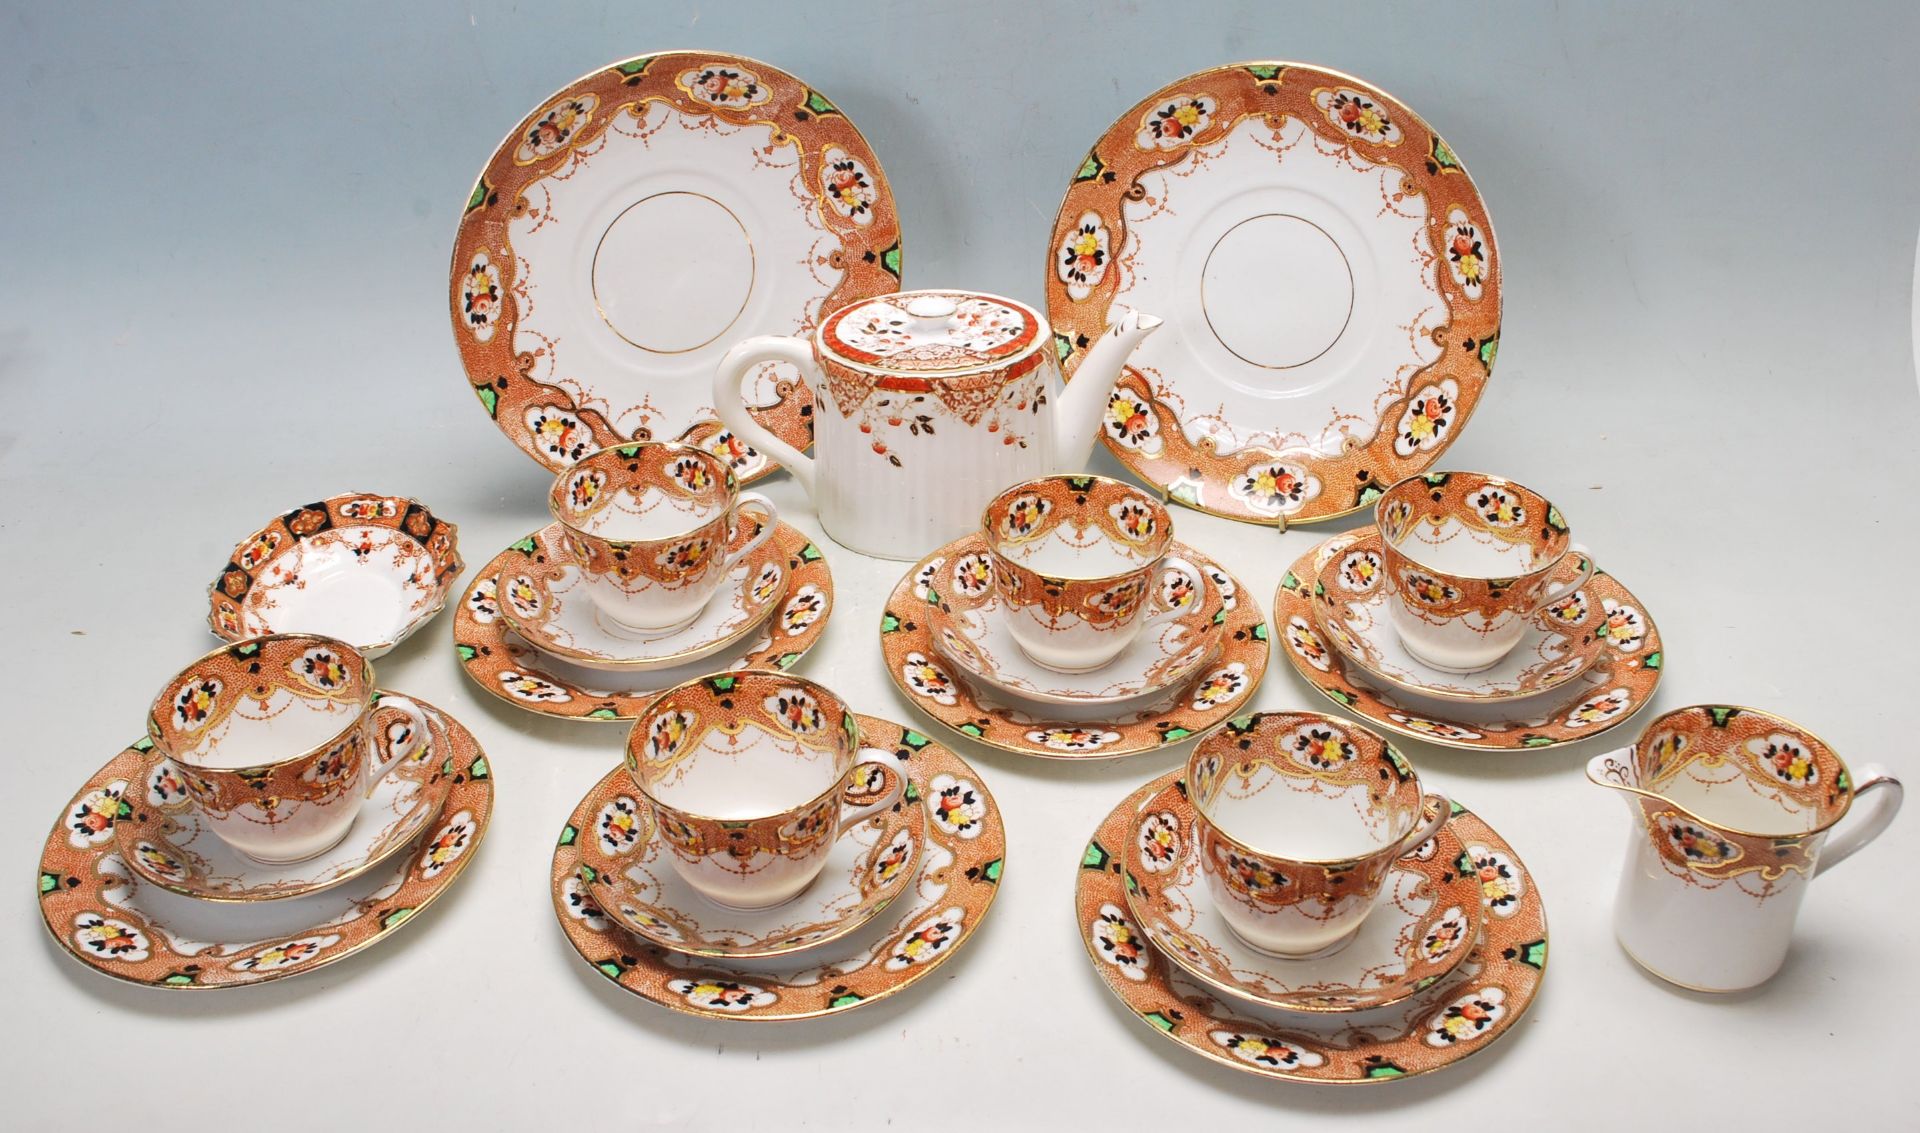 ANTIQUE EARLY 20TH CENTURY ROYAL STAFFORDSHIRE TEA SERVICE